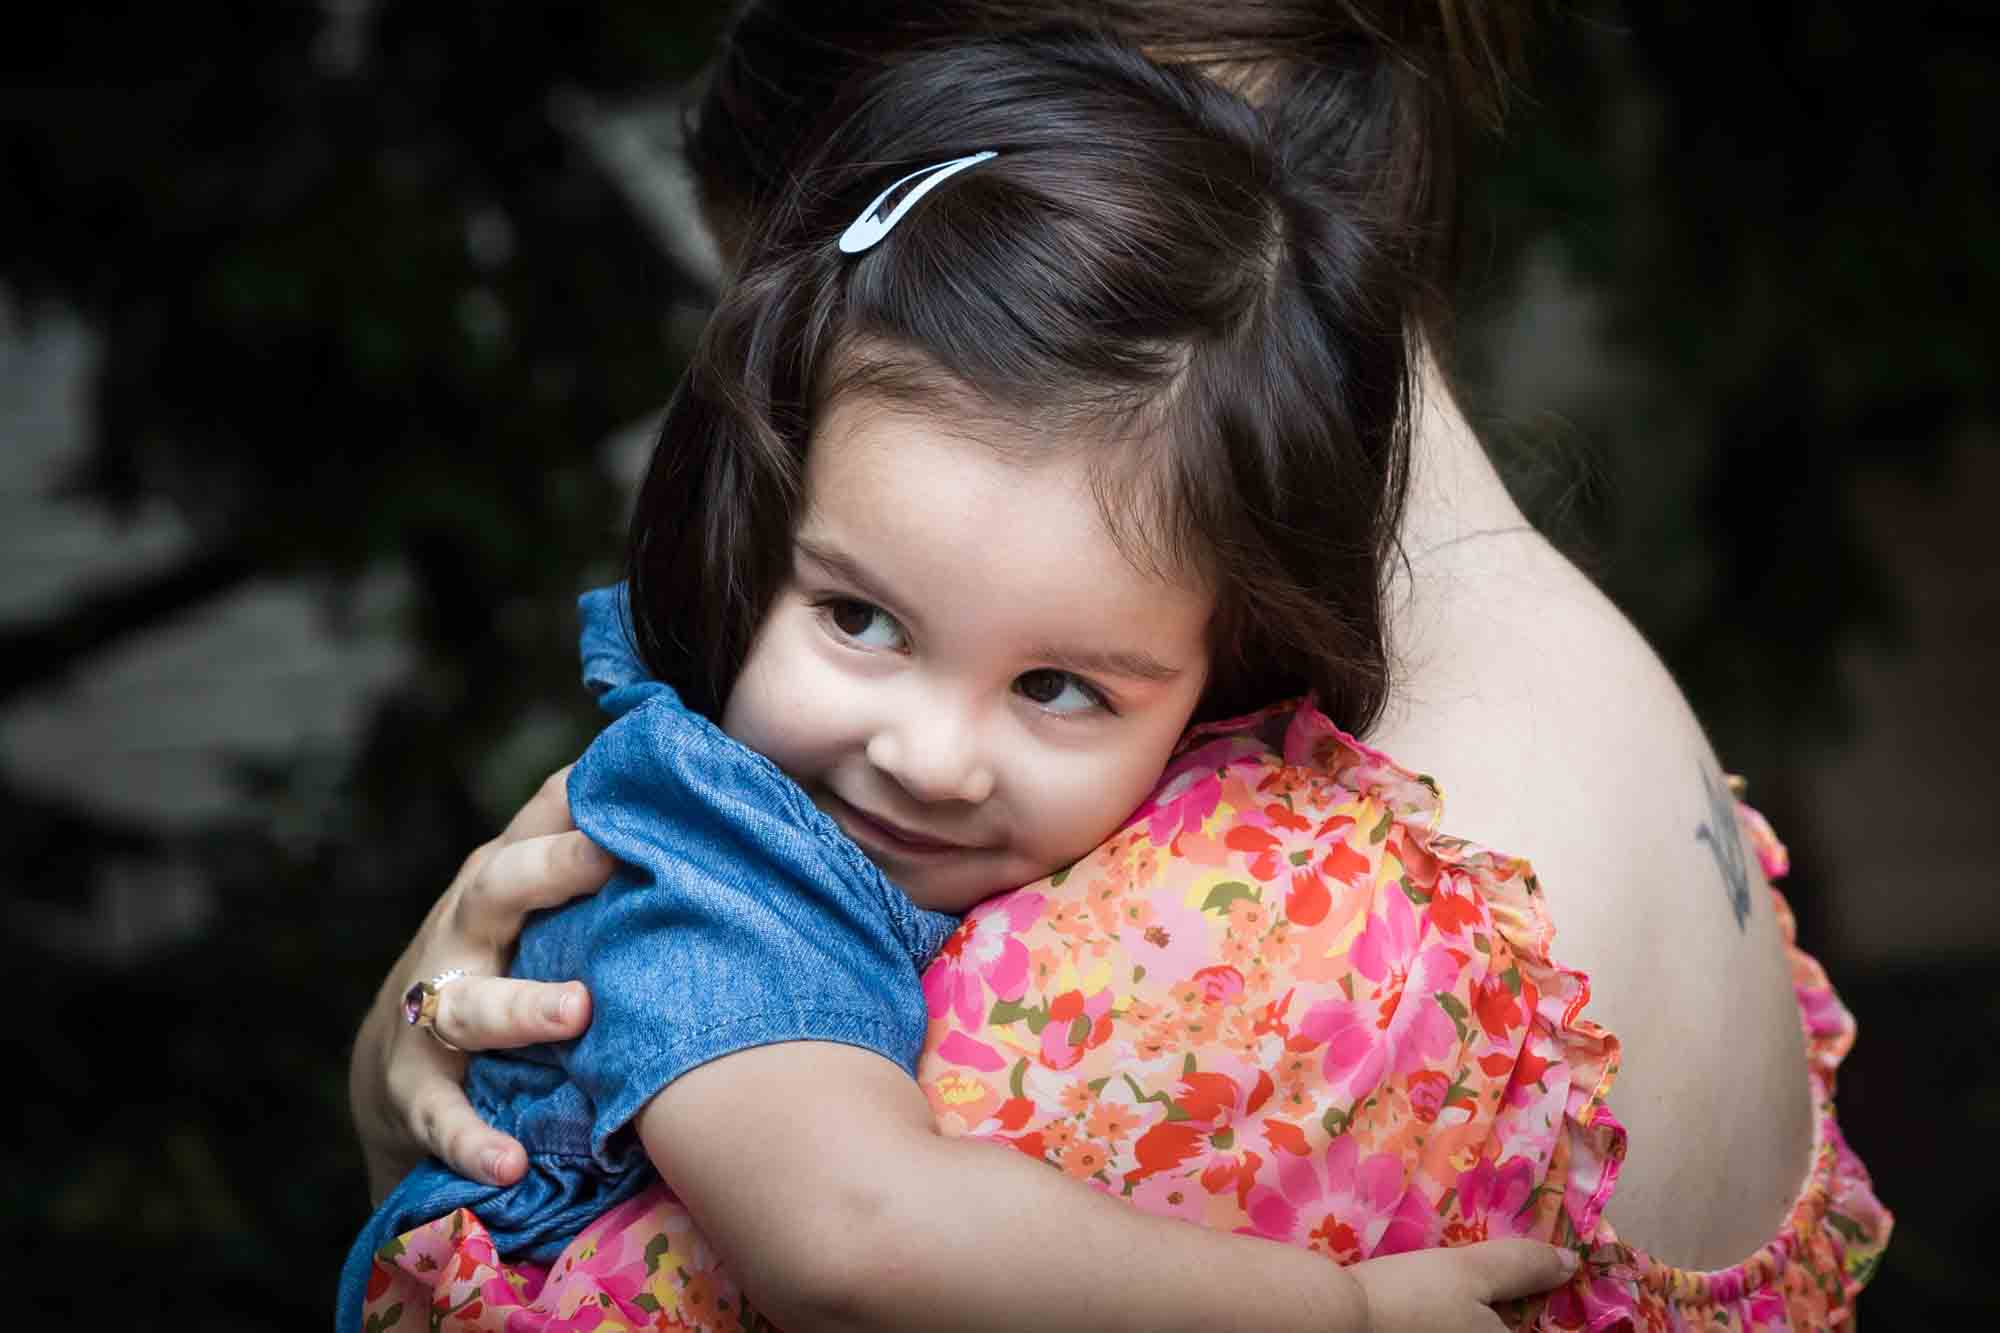 Mother in floral dress holding little girl in blue dress in front of vine-covered wall during a Brooklyn Commons family portrait session